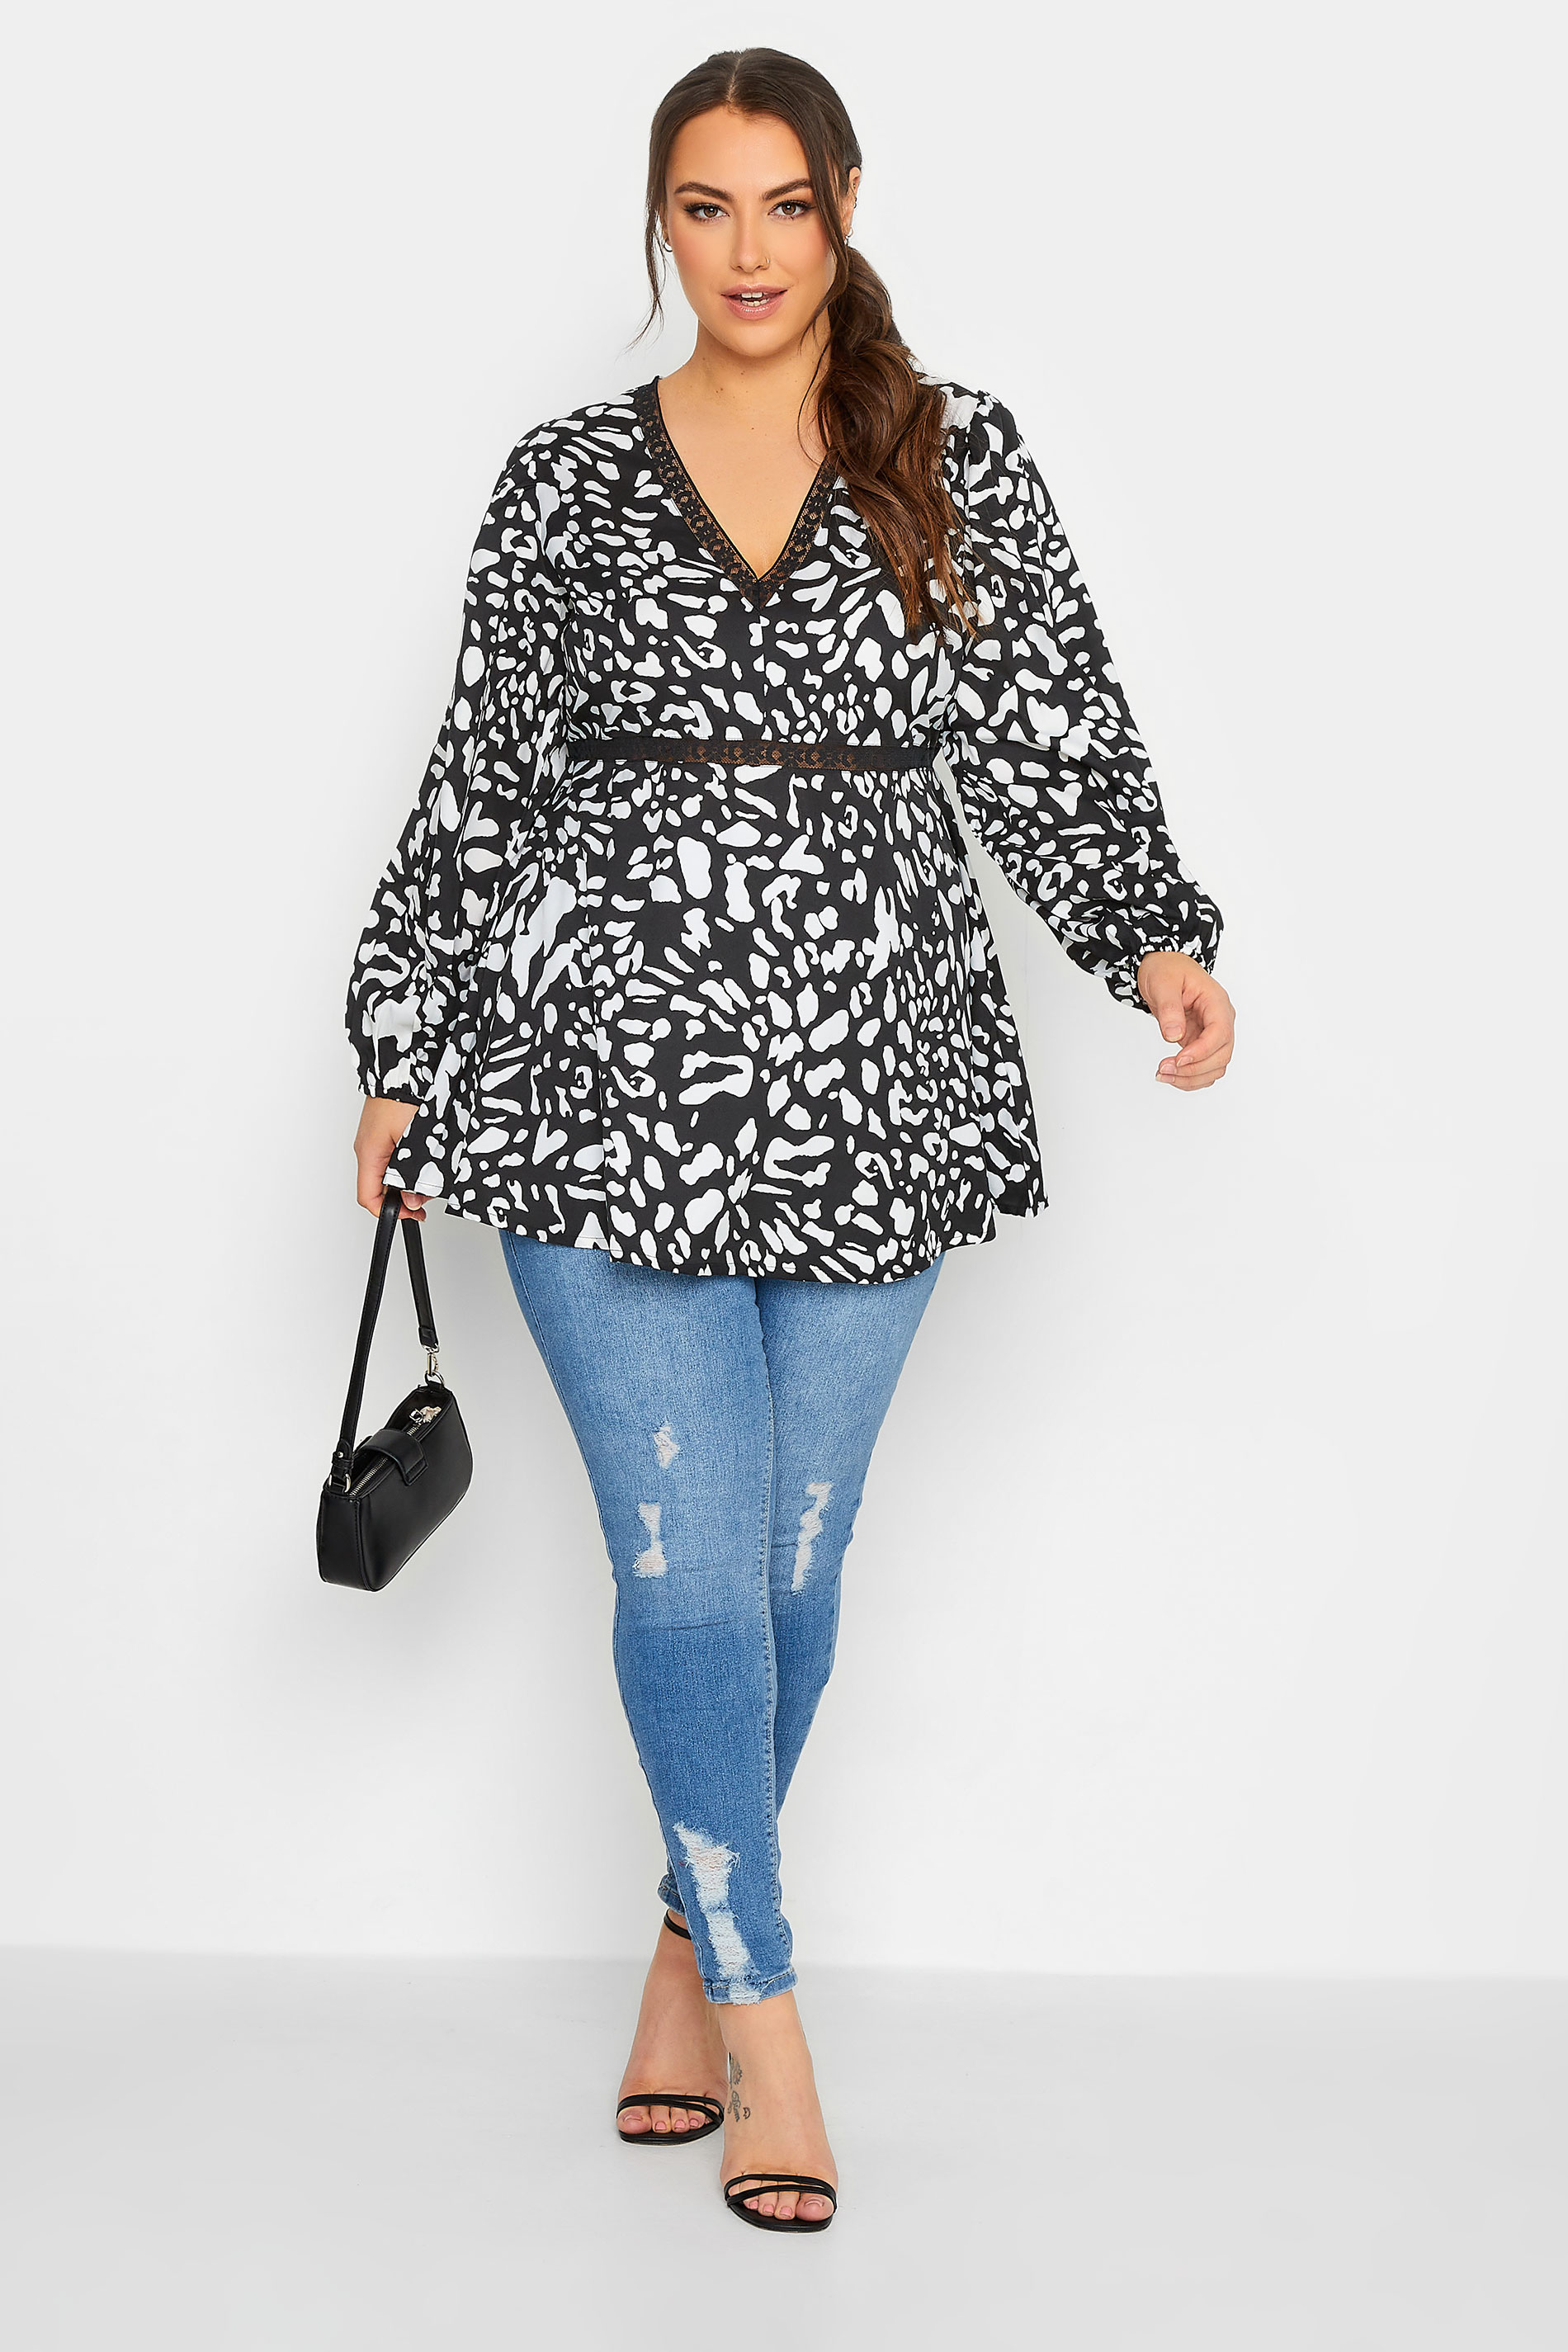 LIMITED COLLECTION Plus Size Black Animal Print Lace Blouse | Yours Clothing 2